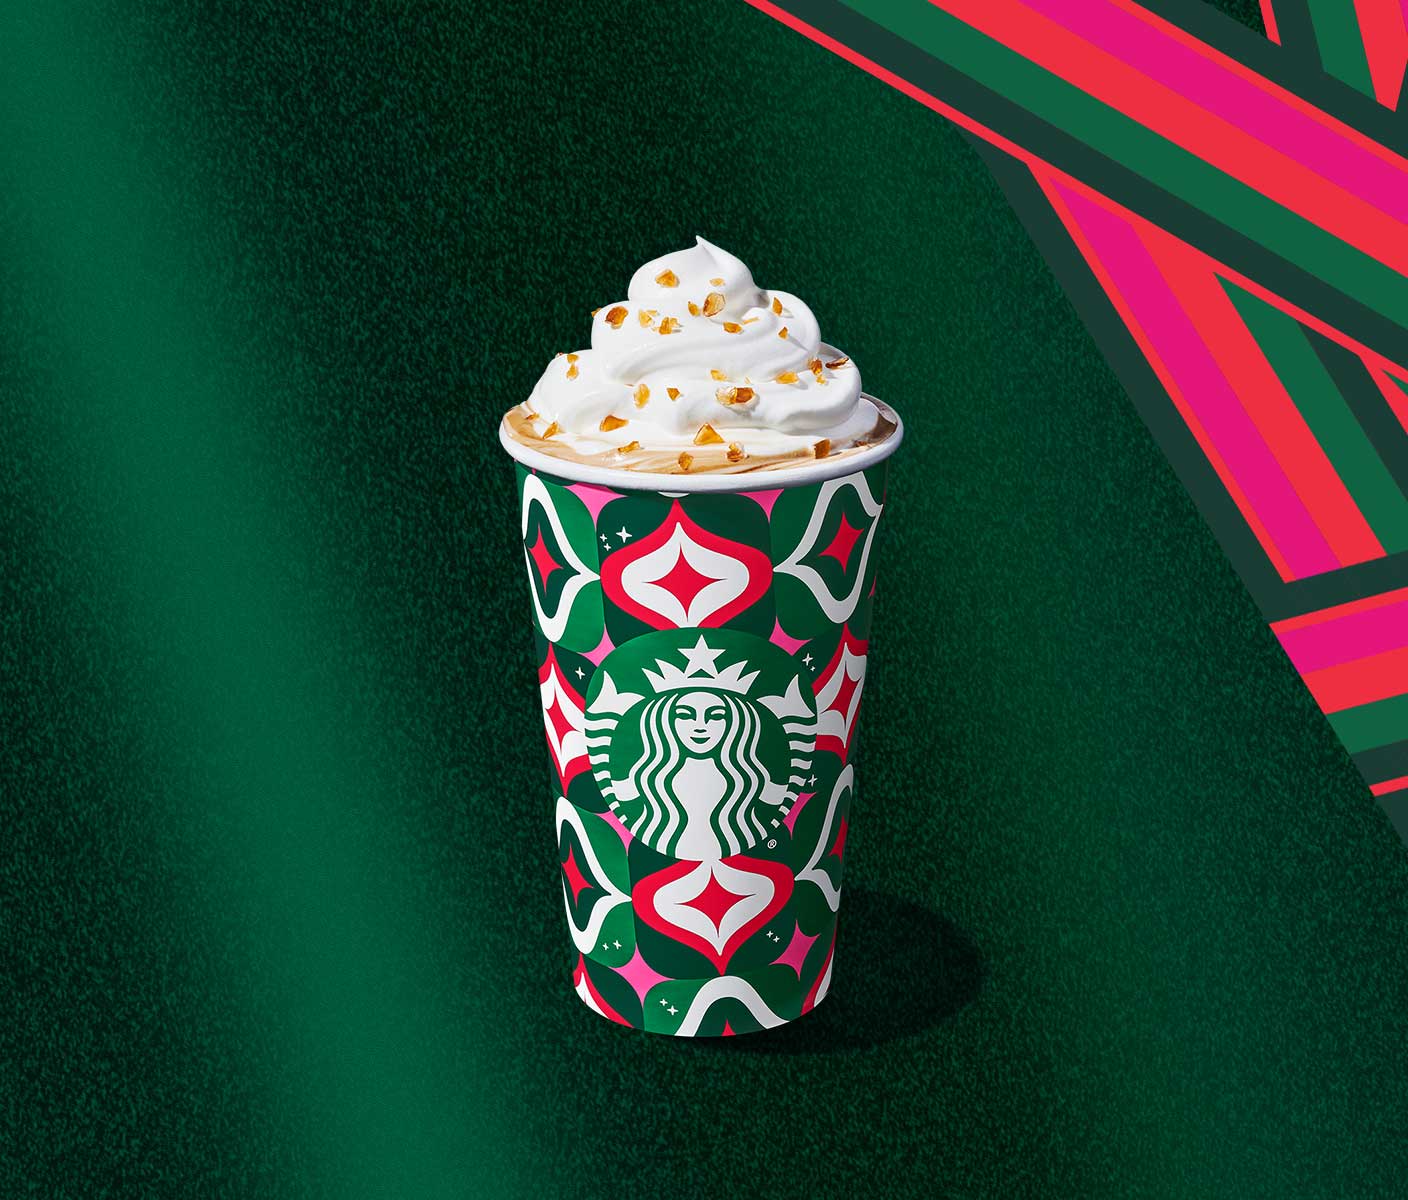 Hot espresso drink with whipped cream and caramel bits in a holiday-themed to-go cup.